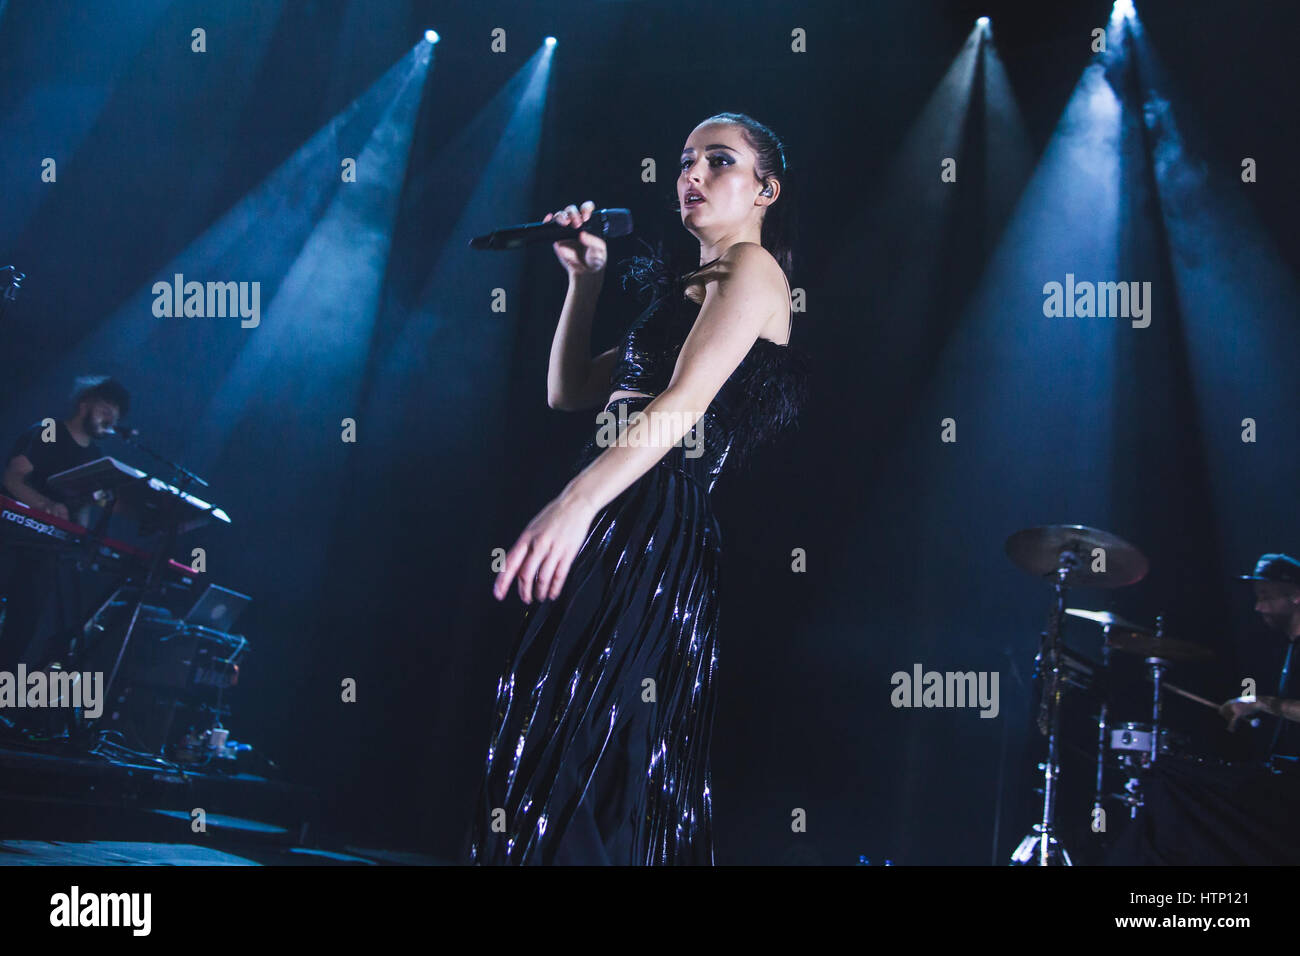 London, UK. 13th March, 2017. March 13, 2017 - American singer and songwriter, Jillian Rose Banks, known simply as Banks, performs in London at the Round House in Camden, 2017 Credit: Myles Wright/ZUMA Wire/Alamy Live News Stock Photo